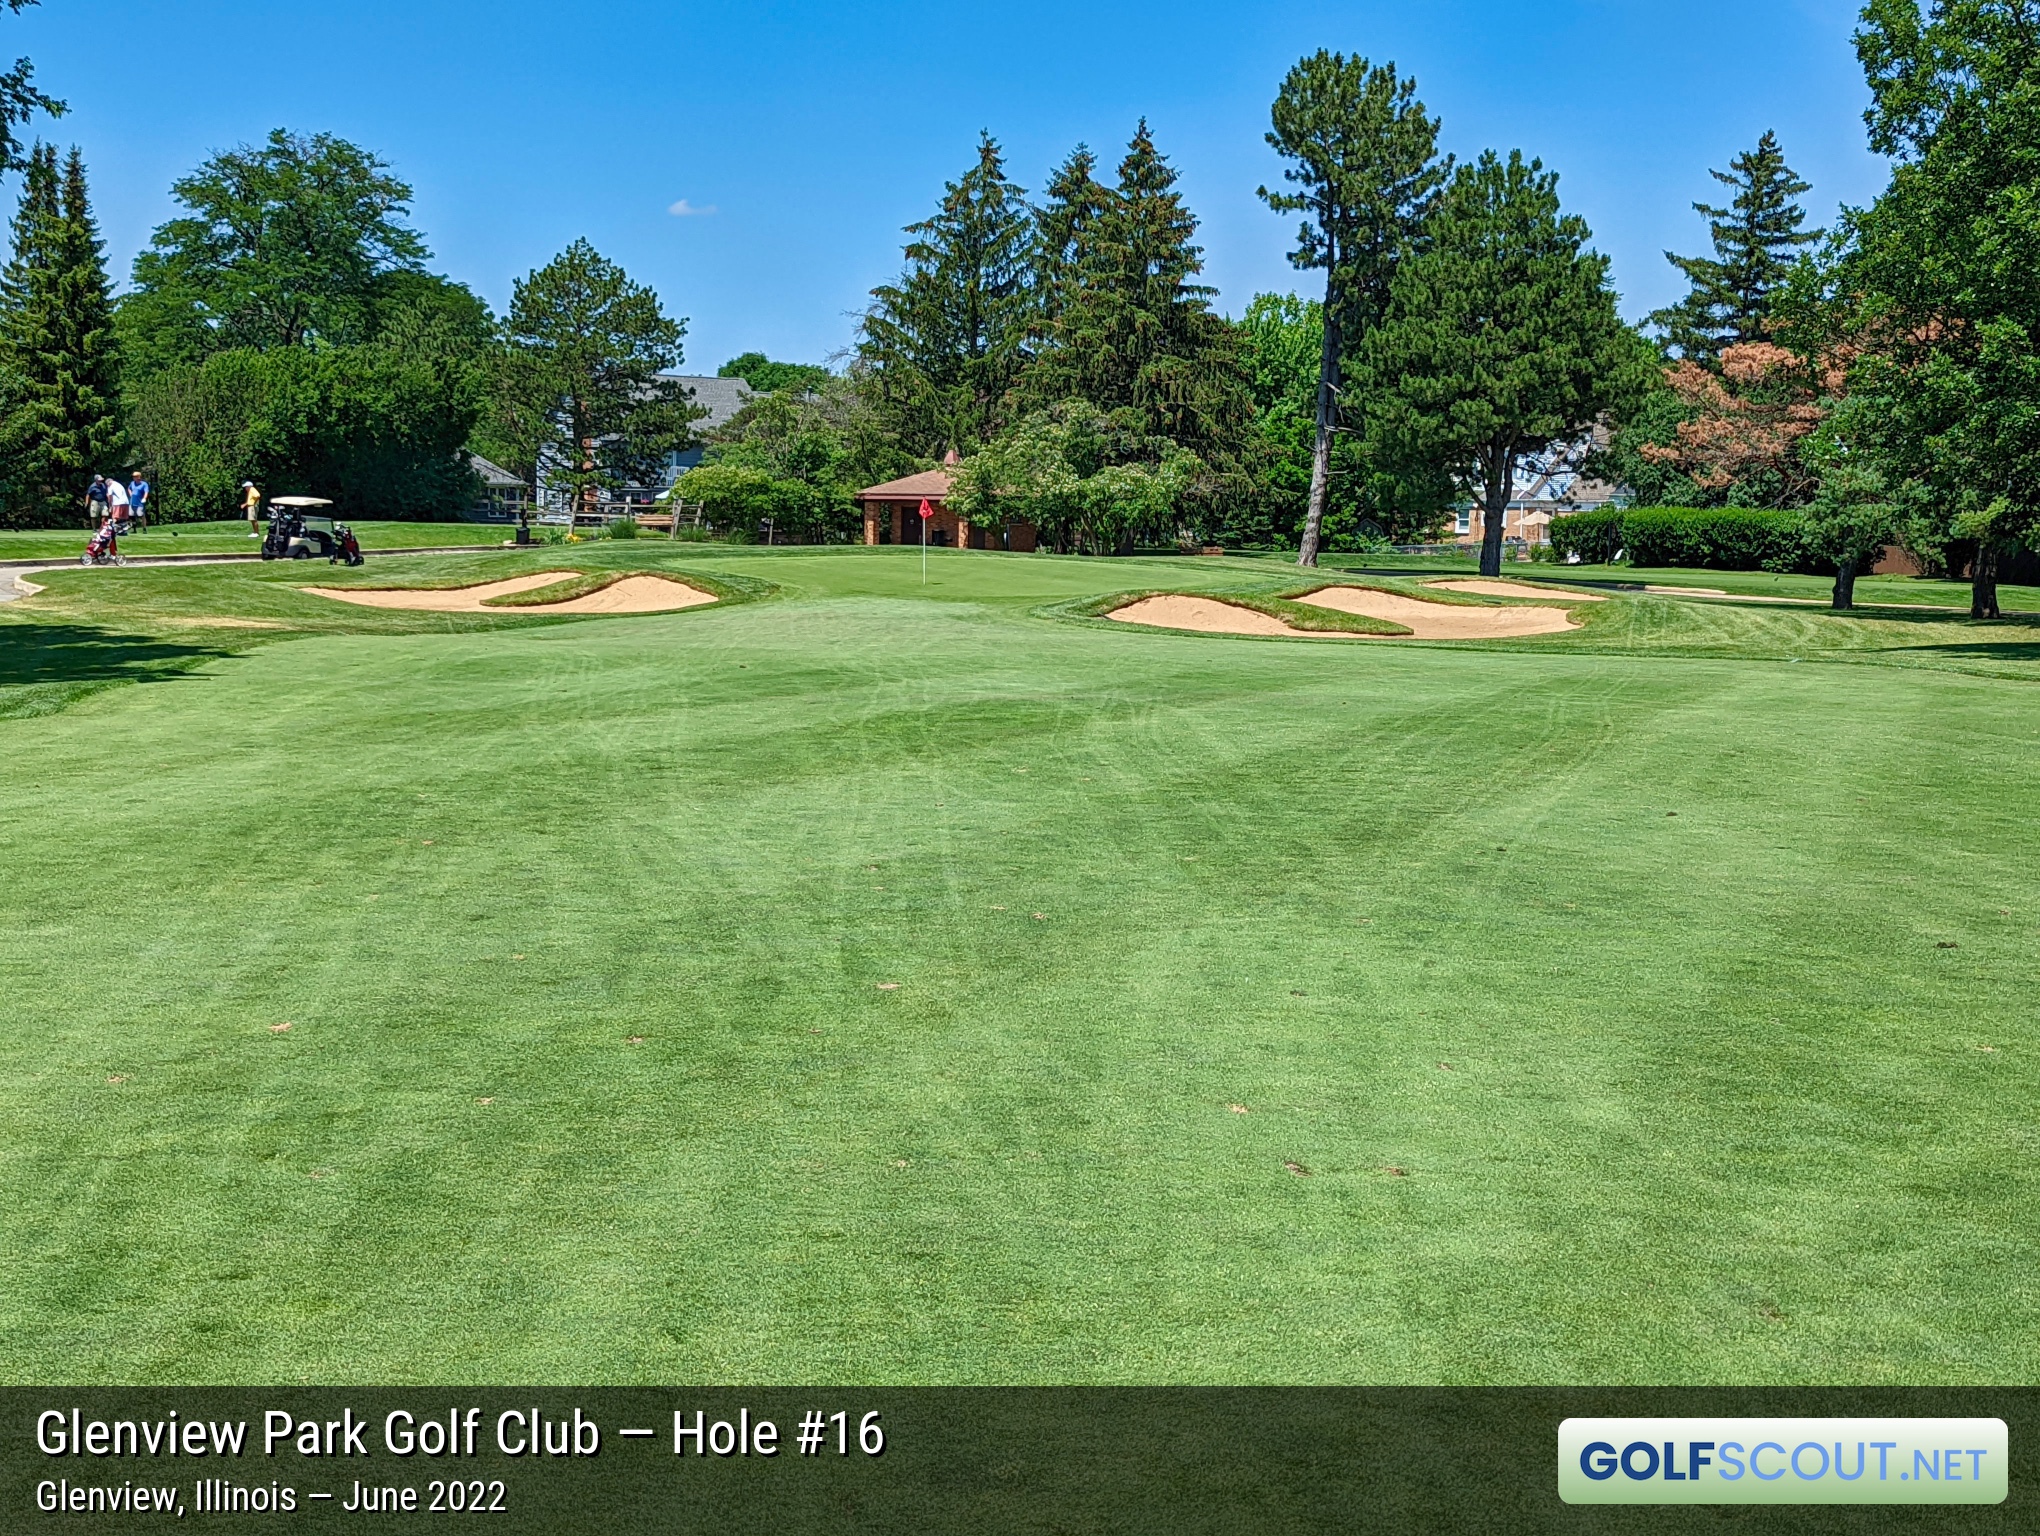 Photo of hole #16 at Glenview Park Golf Club in Glenview, Illinois. 